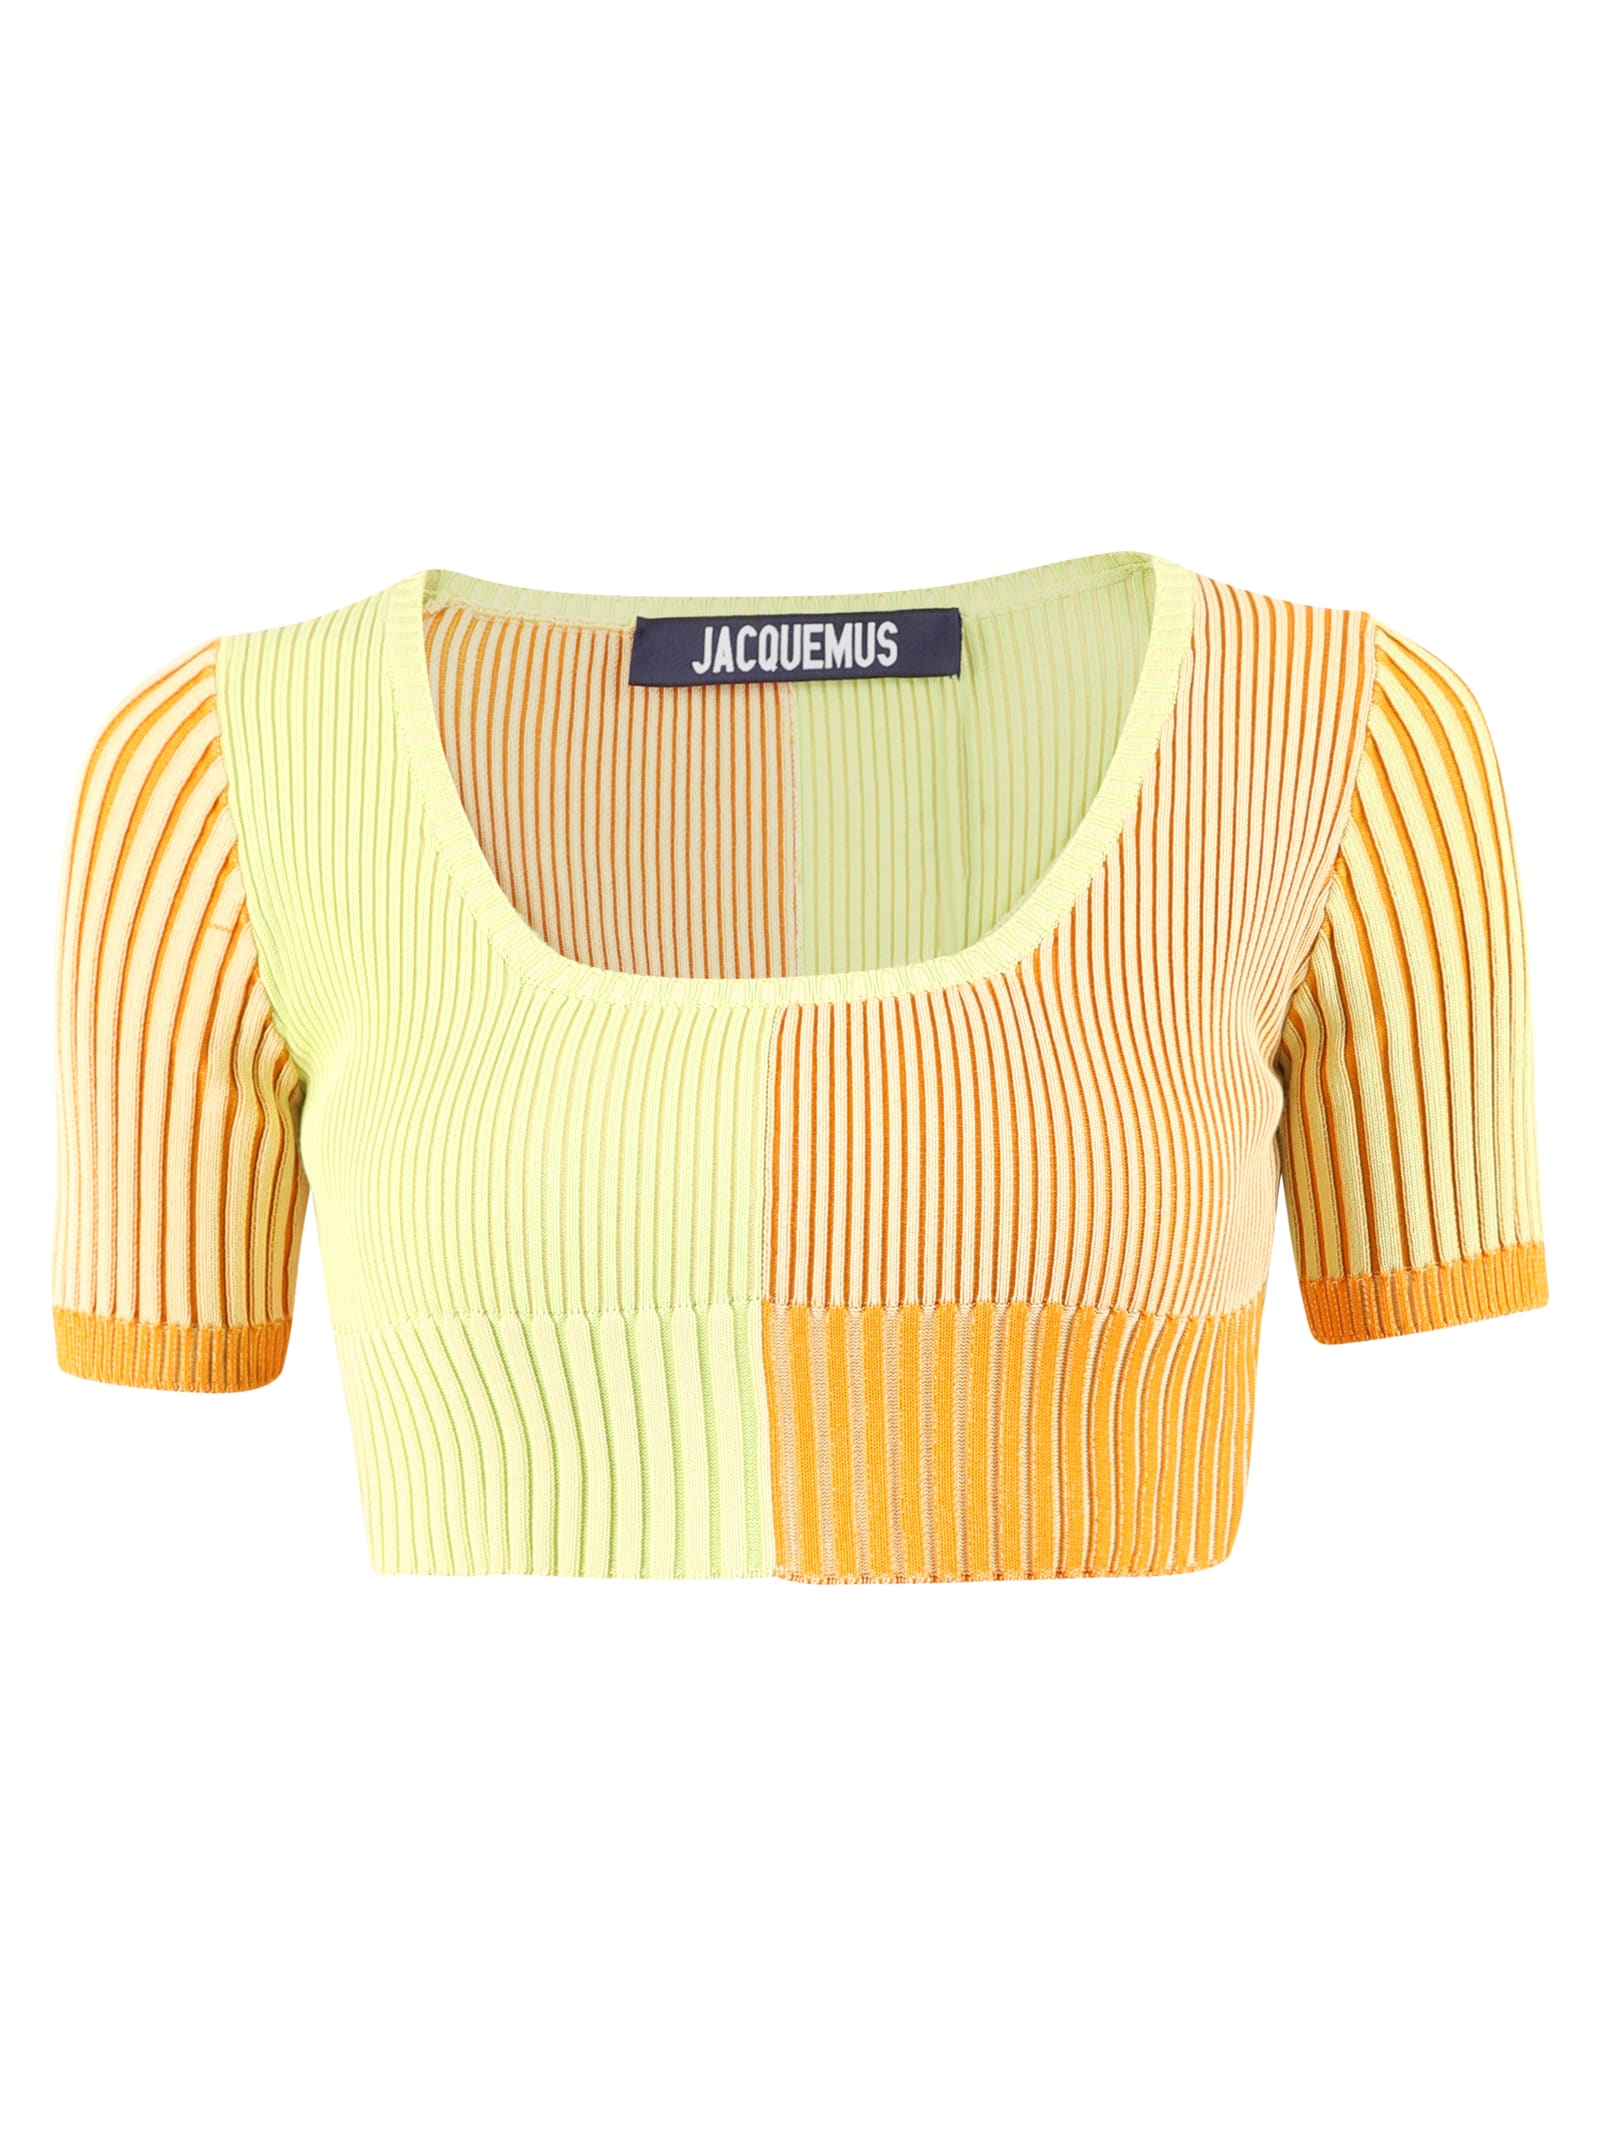 JACQUEMUS CROPPED TOP,11246357